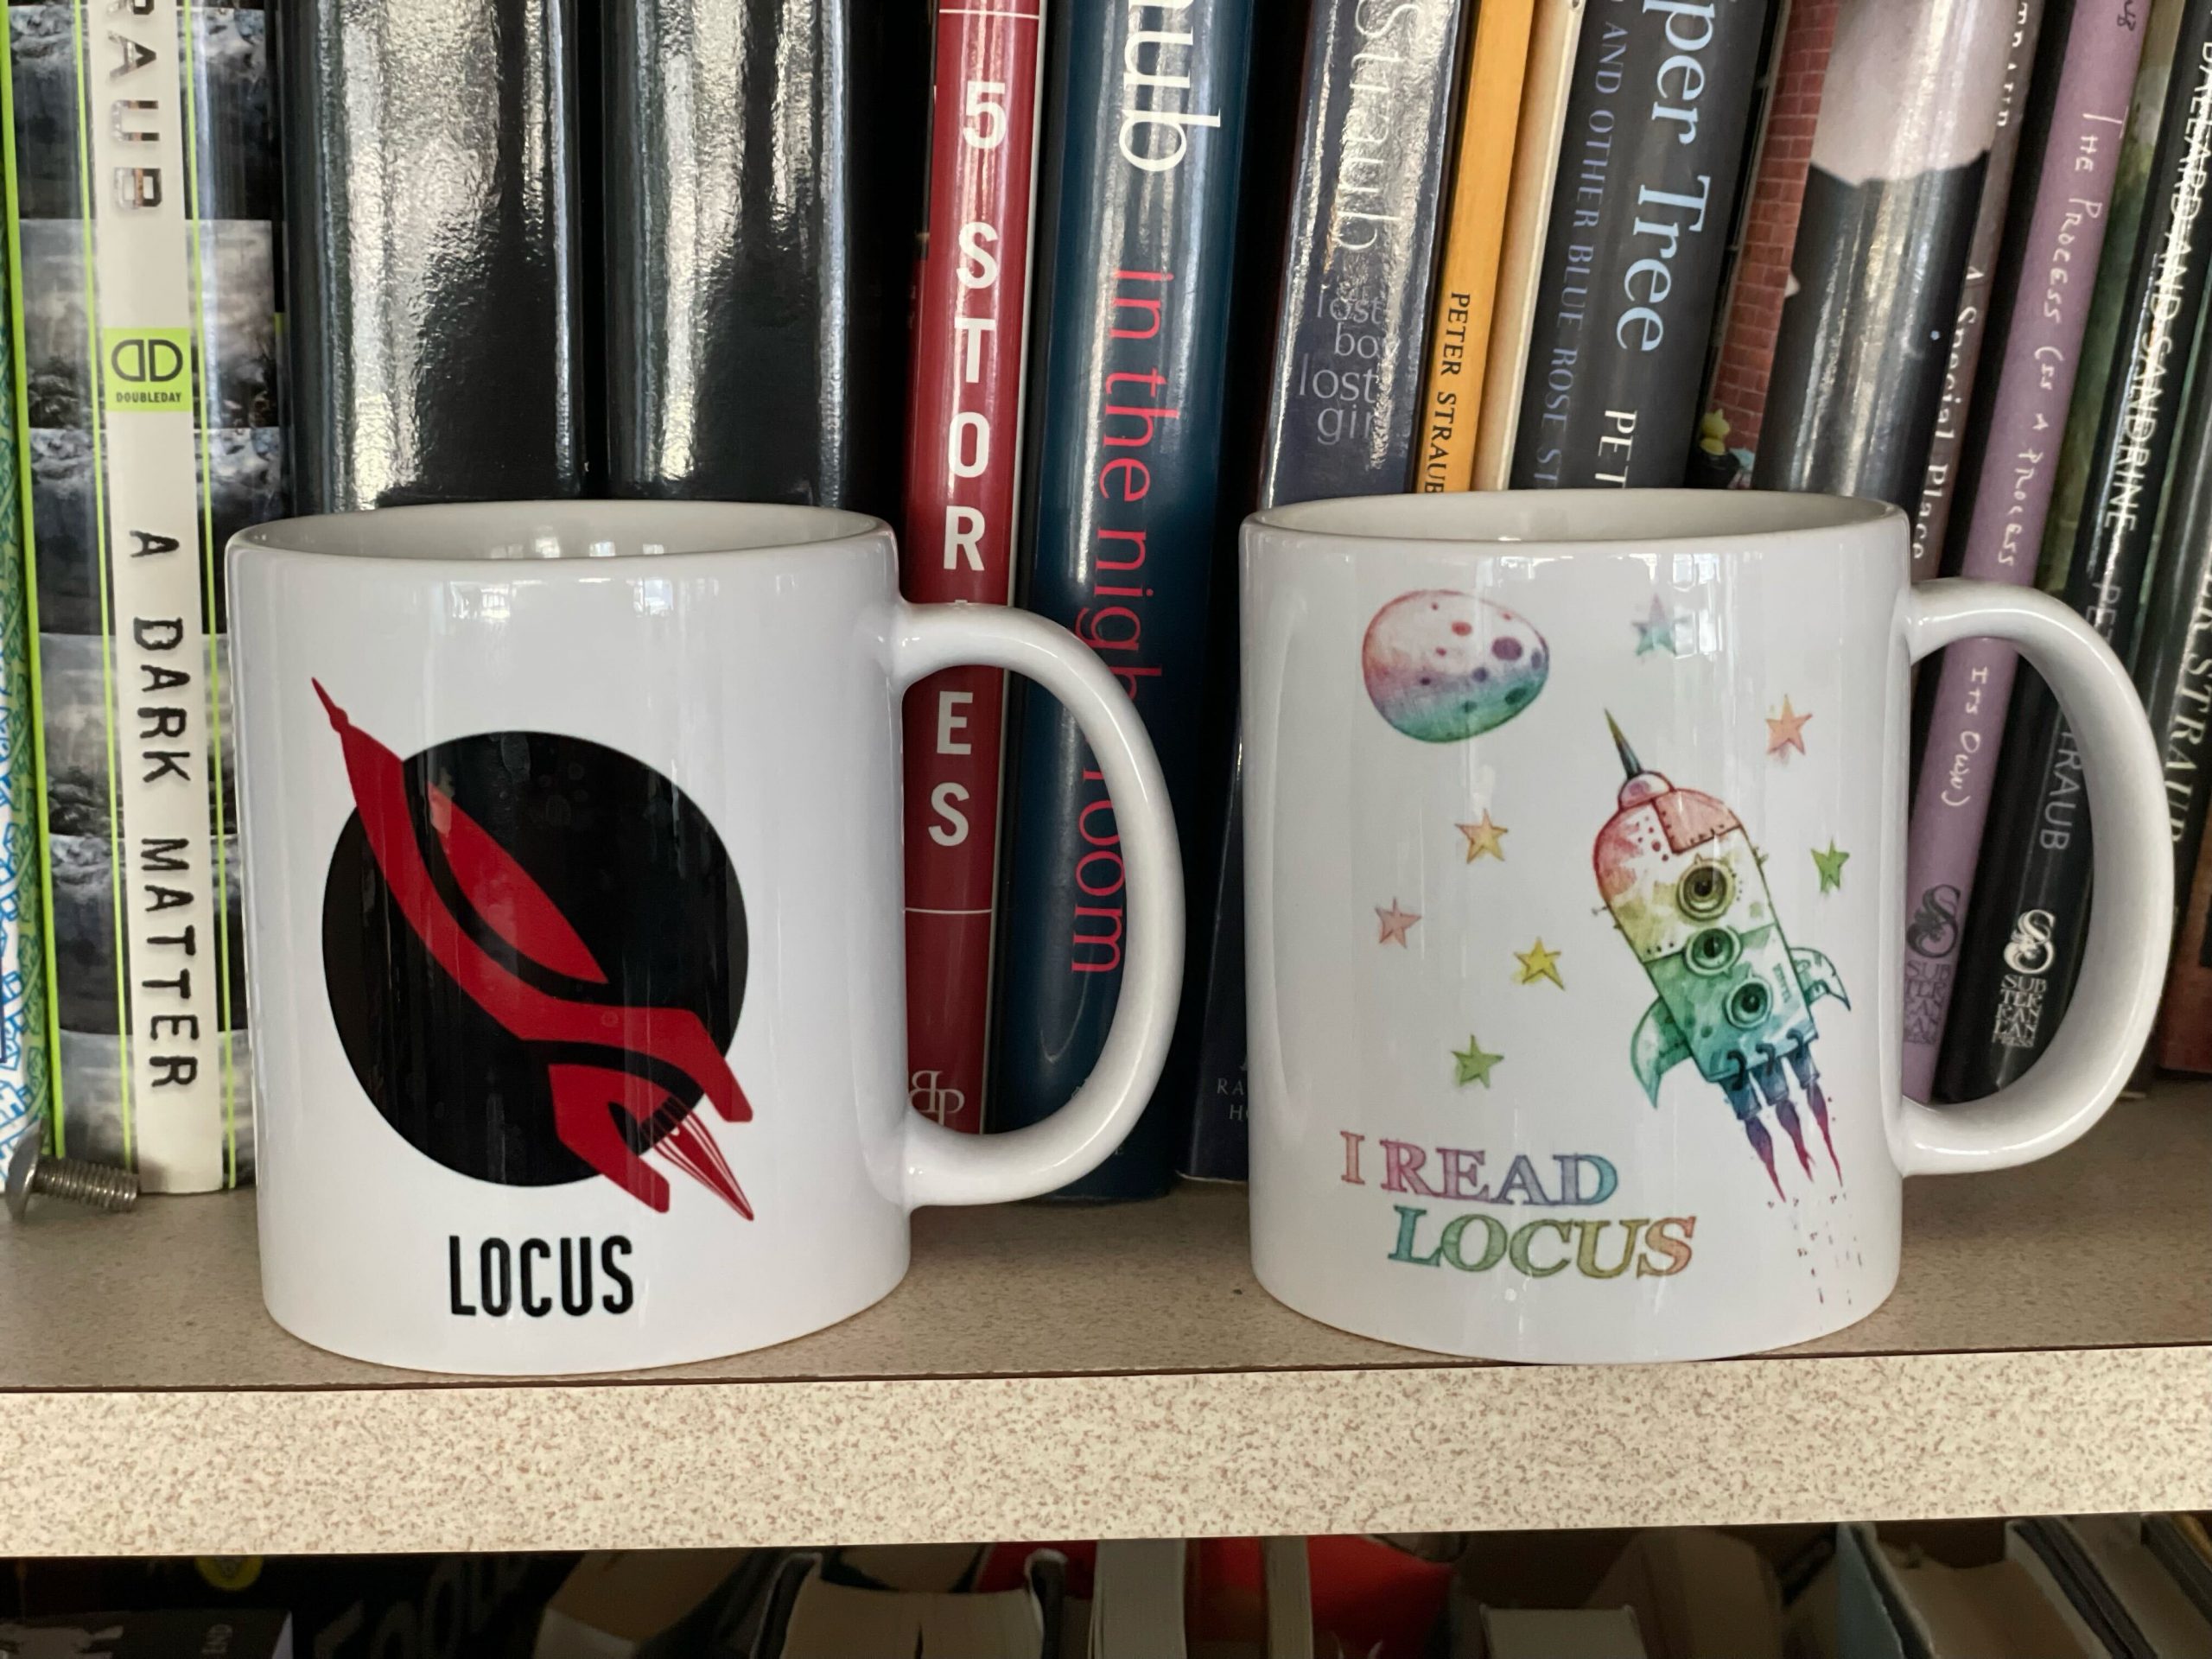 Two coffee mugs, one with a rocket logo and the other with an colorful illustration of a rocket by Shaun Tan